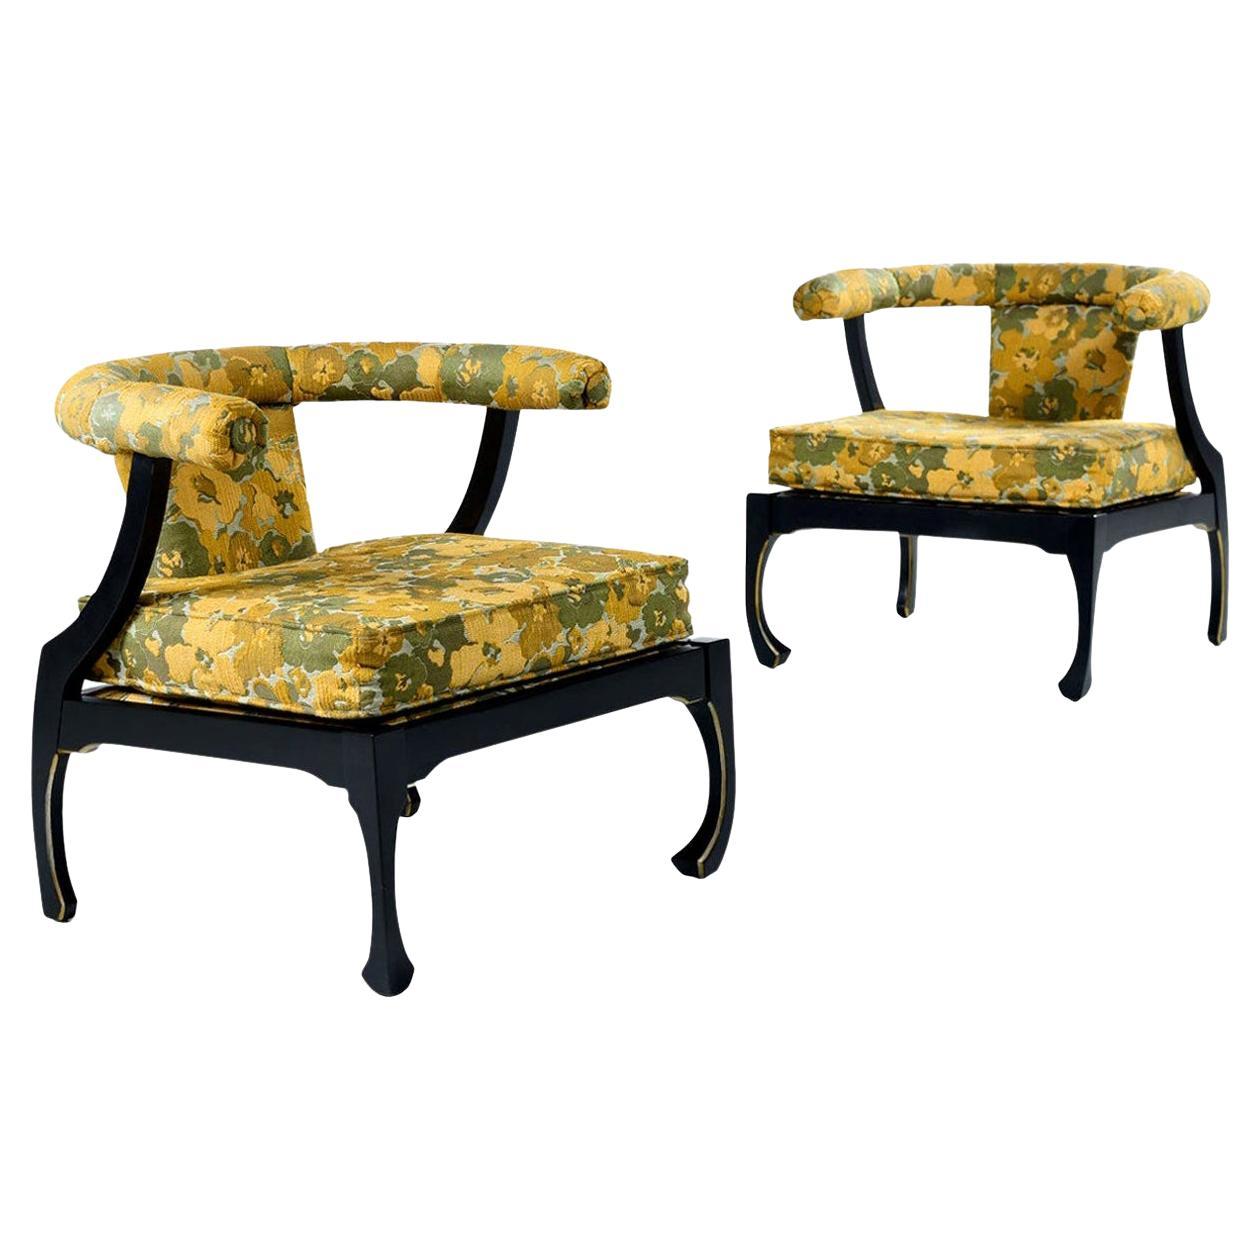 James Mont Style Black Lacquer Gilt Asian Modern Chinoiserie Armchairs by Harris